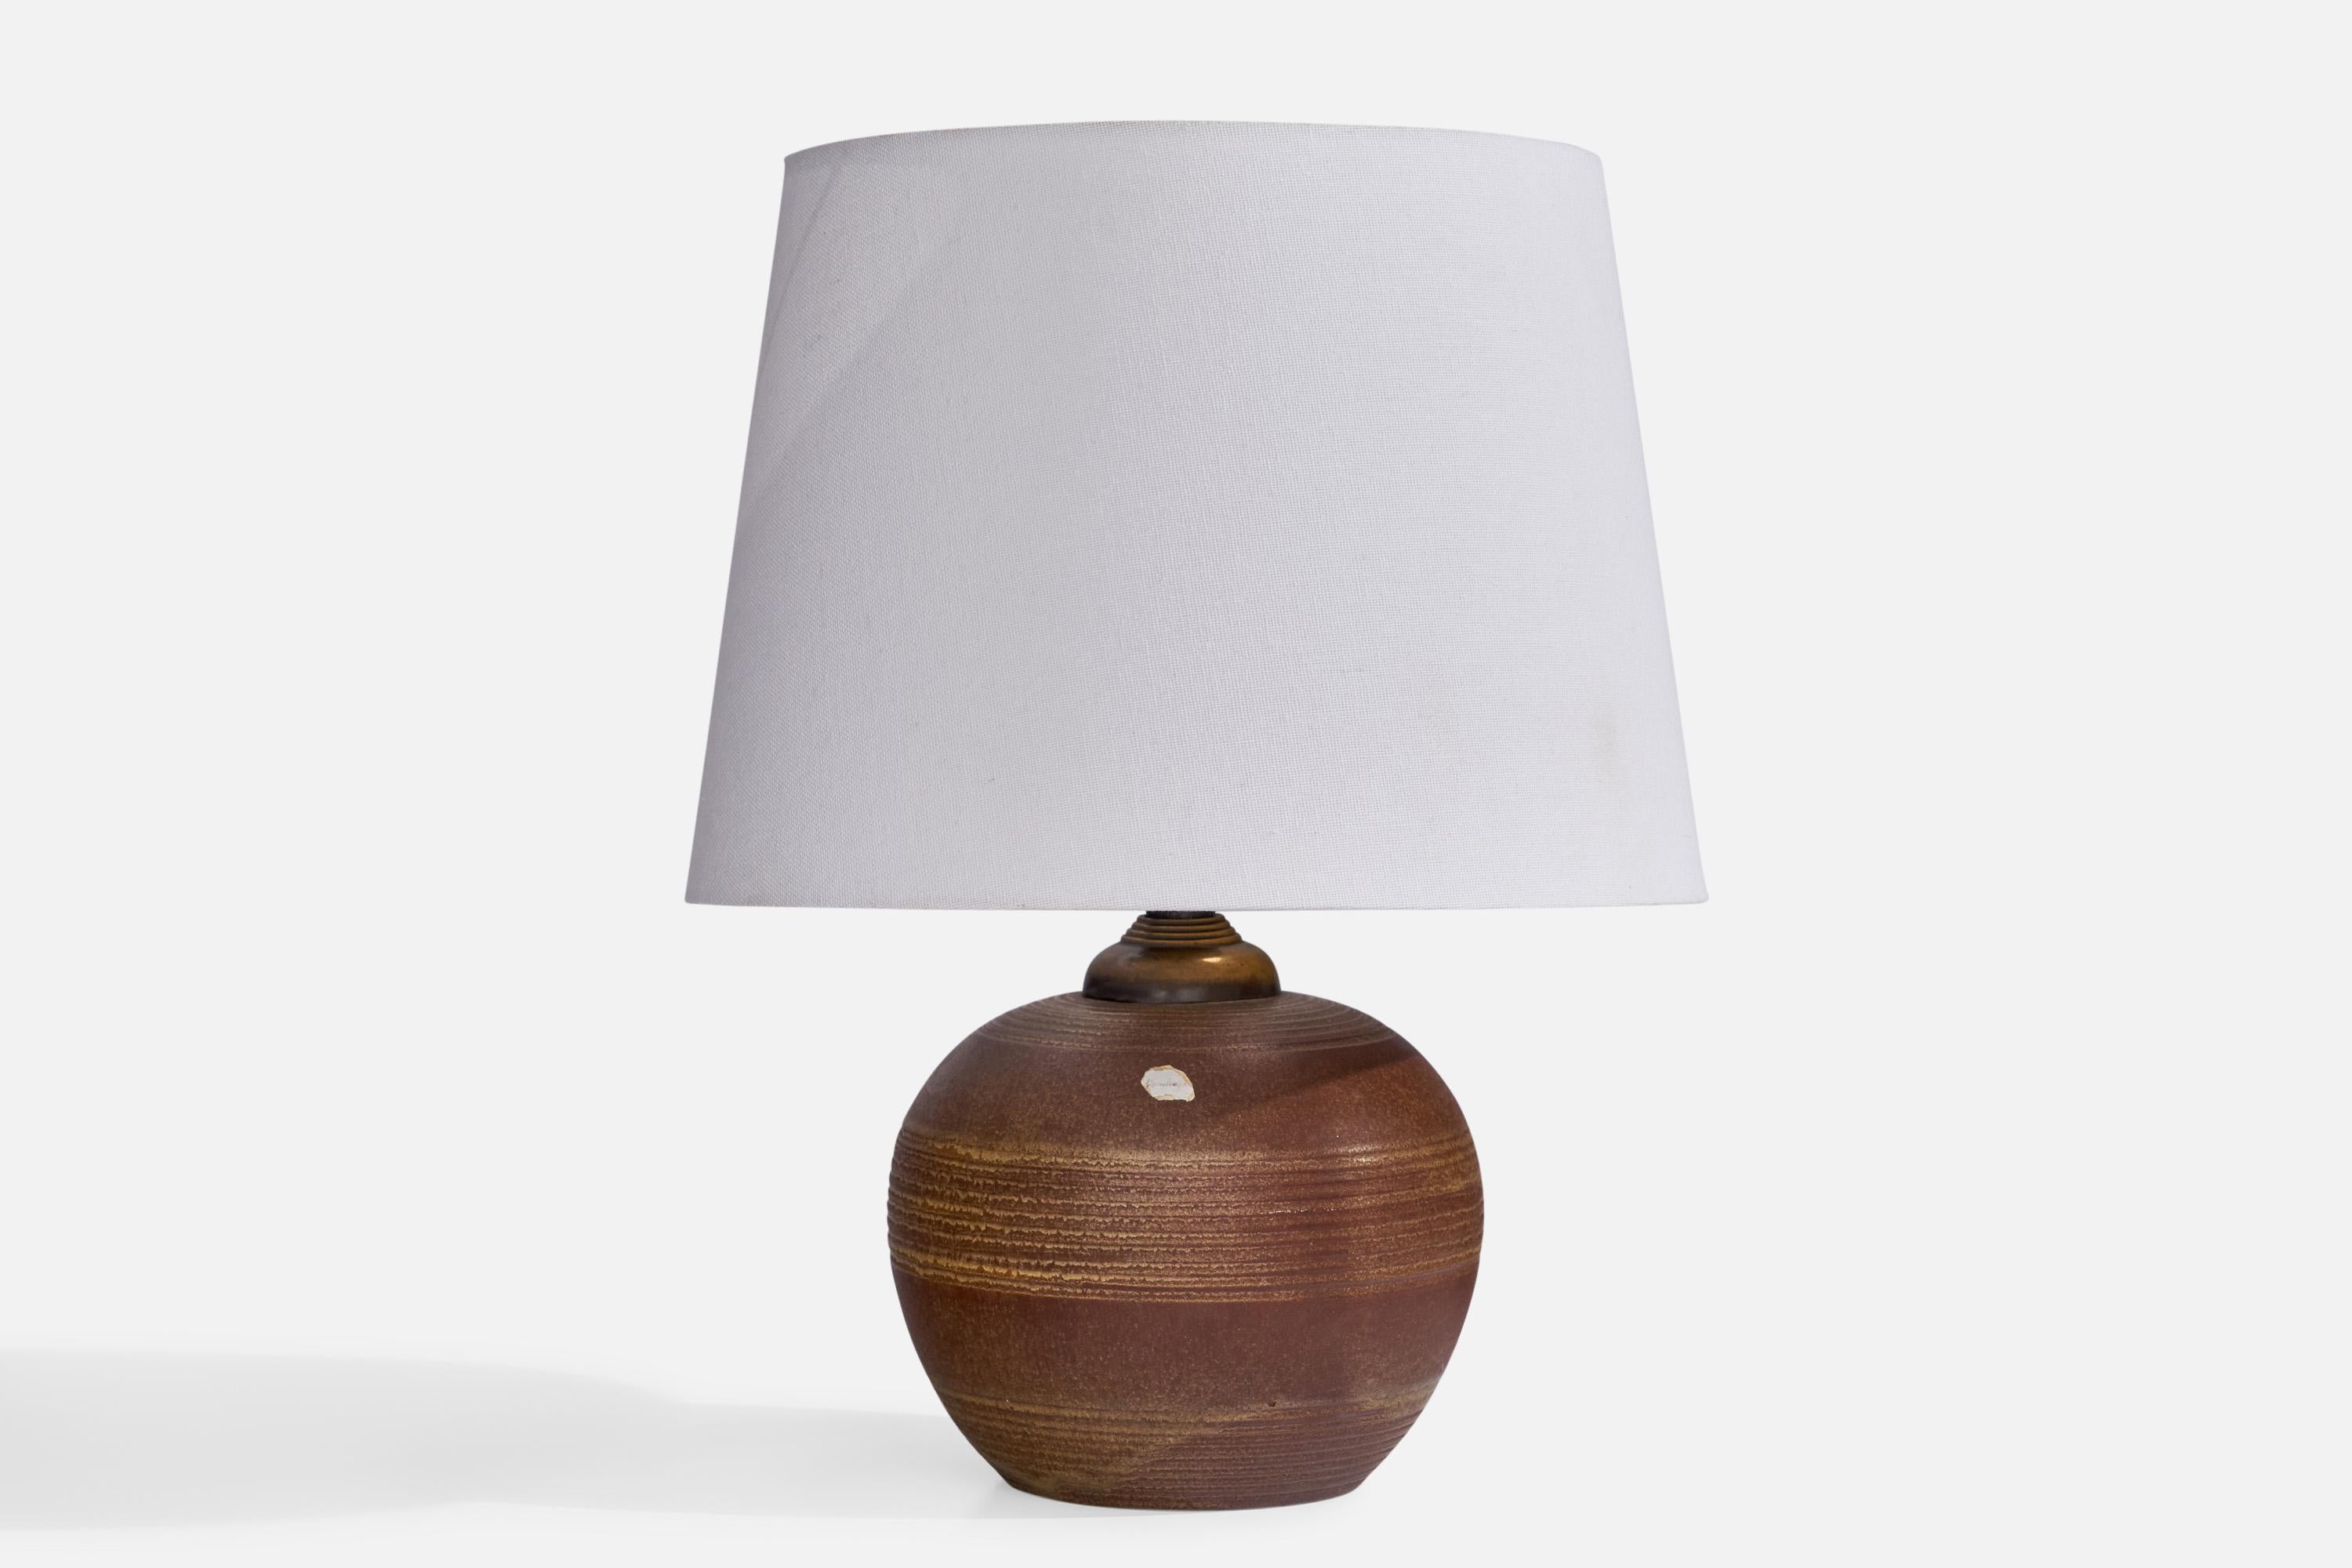 A brown-glazed earthenware and brass table lamp designed and produced by Upsala Ekeby, Sweden, 1930s.

Dimensions of Lamp (inches): 8.25” H x 5.5” Diameter
Dimensions of Shade (inches): 8” Top Diameter x 10” Bottom Diameter x 7.25” H
Dimensions of